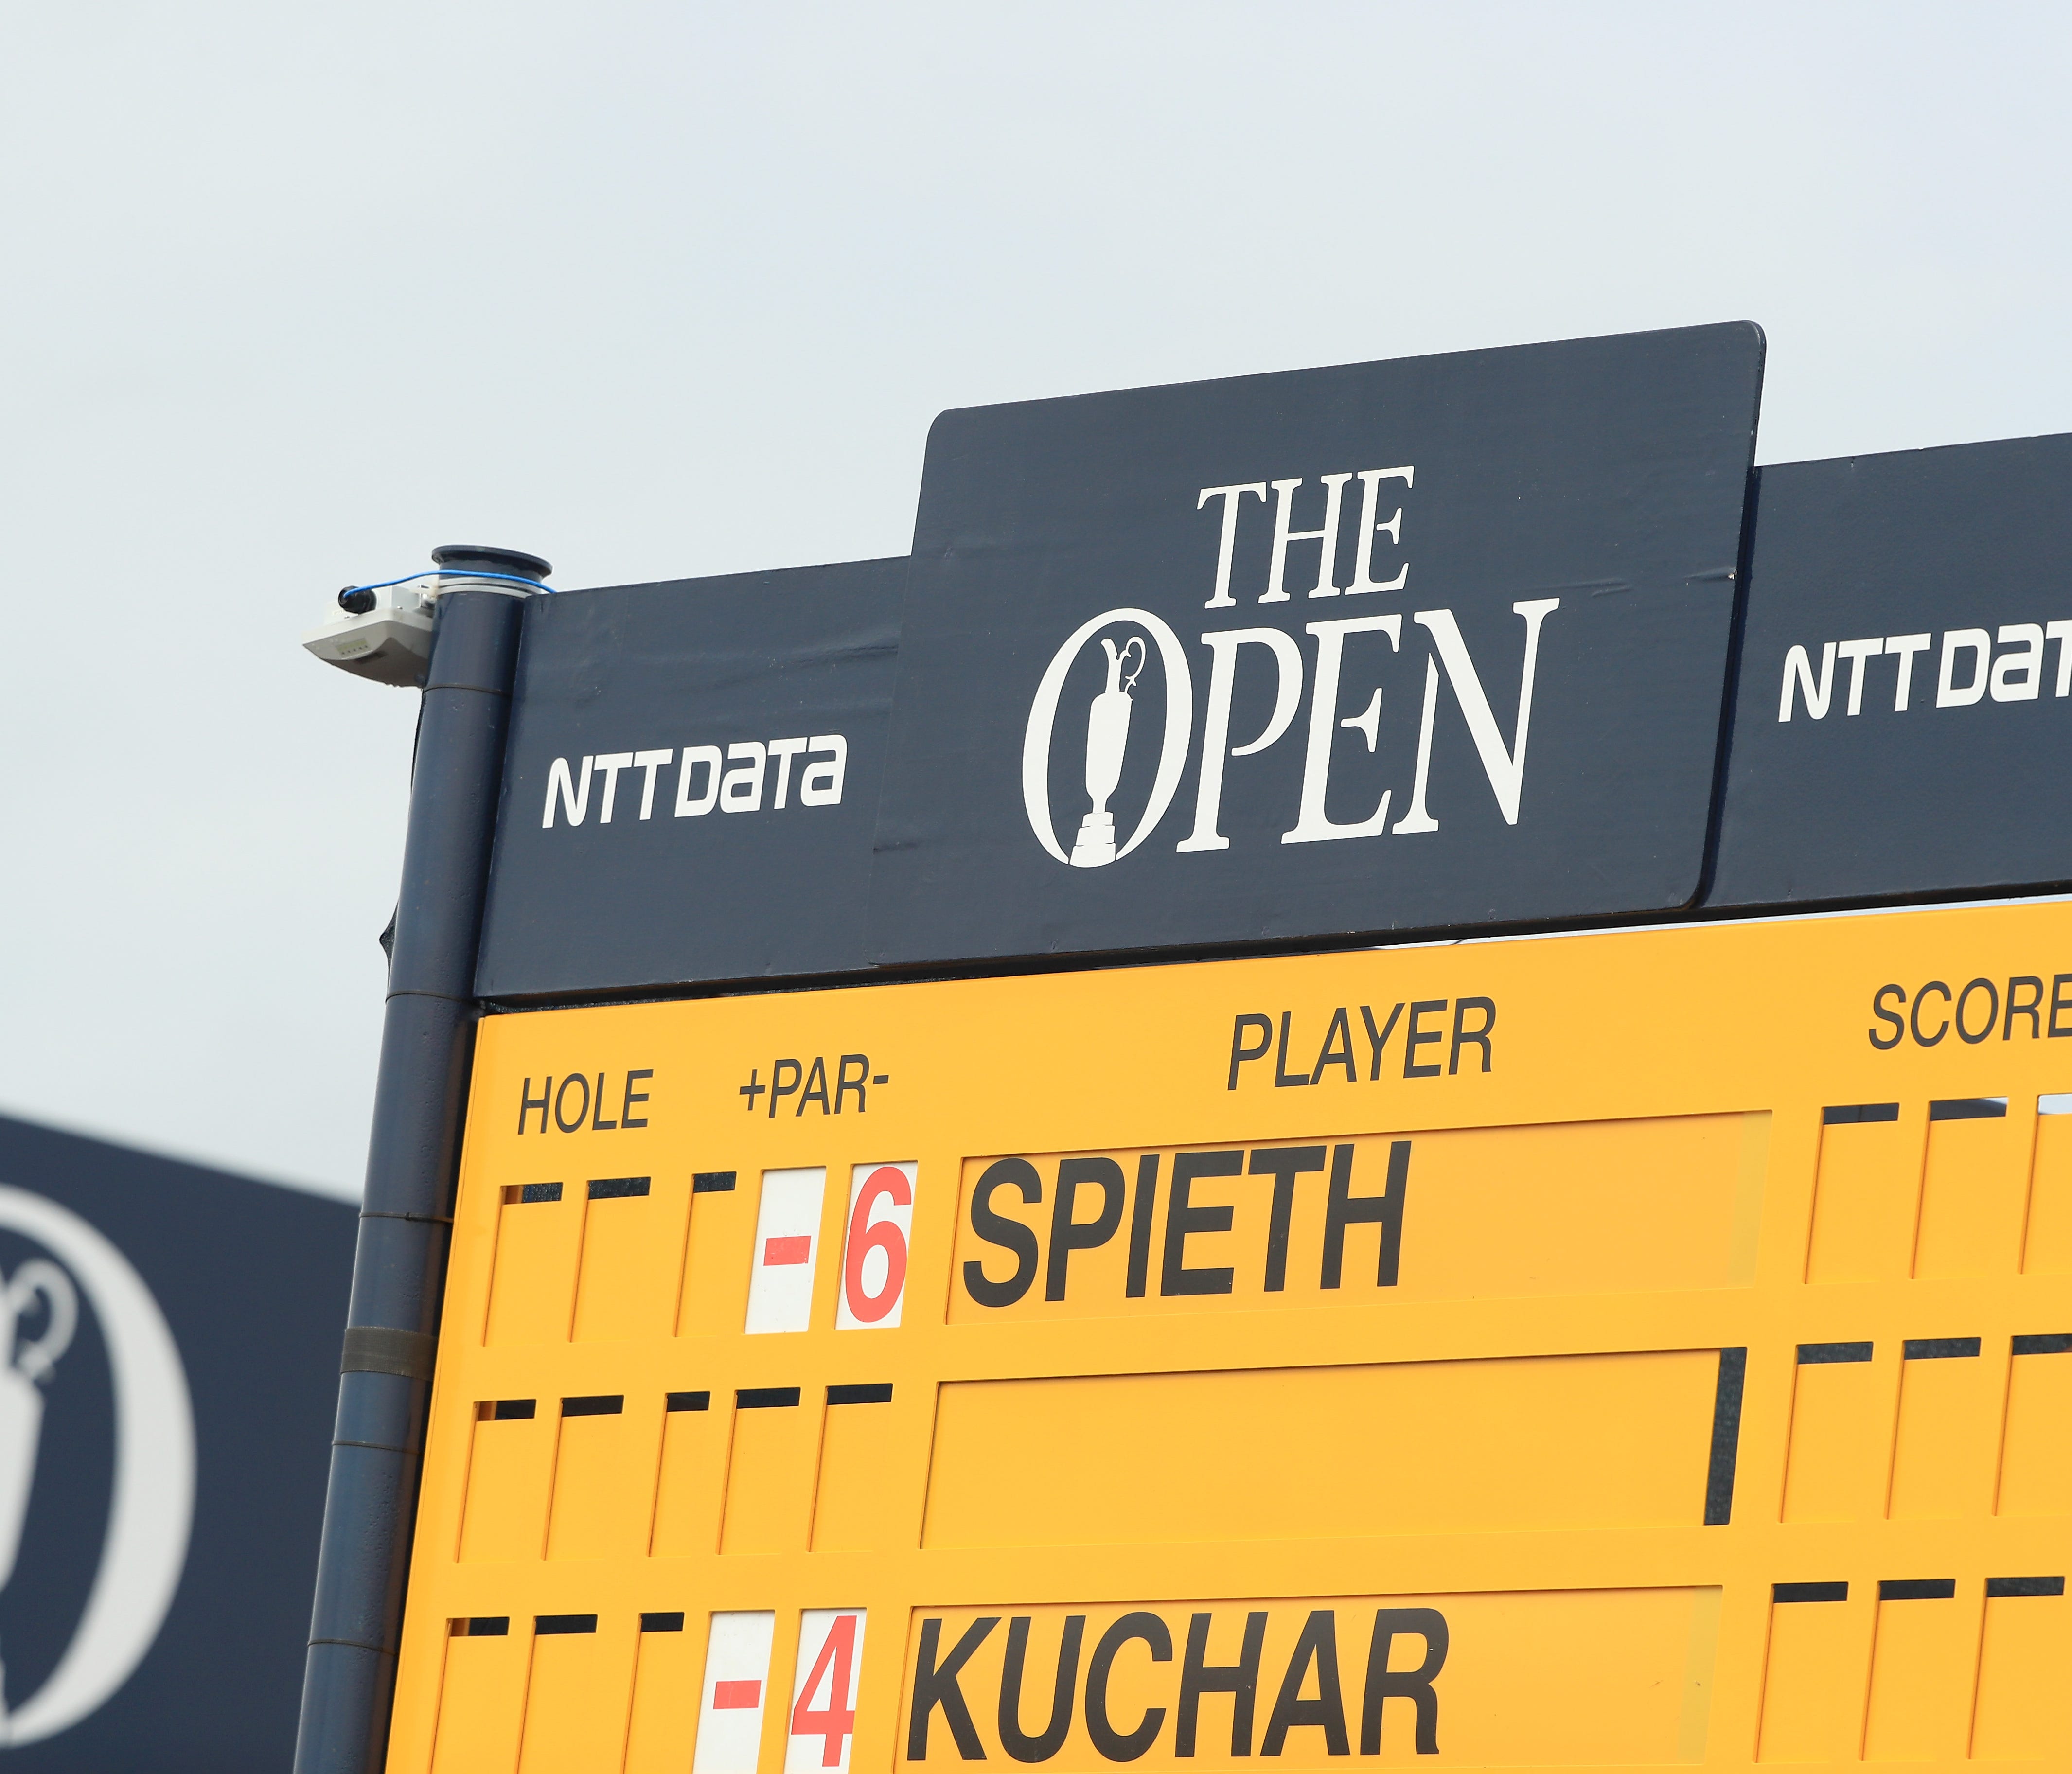 SOUTHPORT, ENGLAND - JULY 22:  Jordan Spieth of the United States tops the leaderboard at the start of the third round of the 146th Open Championship at Royal Birkdale on July 22, 2017 in Southport, England.  (Photo by Andrew Redington/Getty Images) 